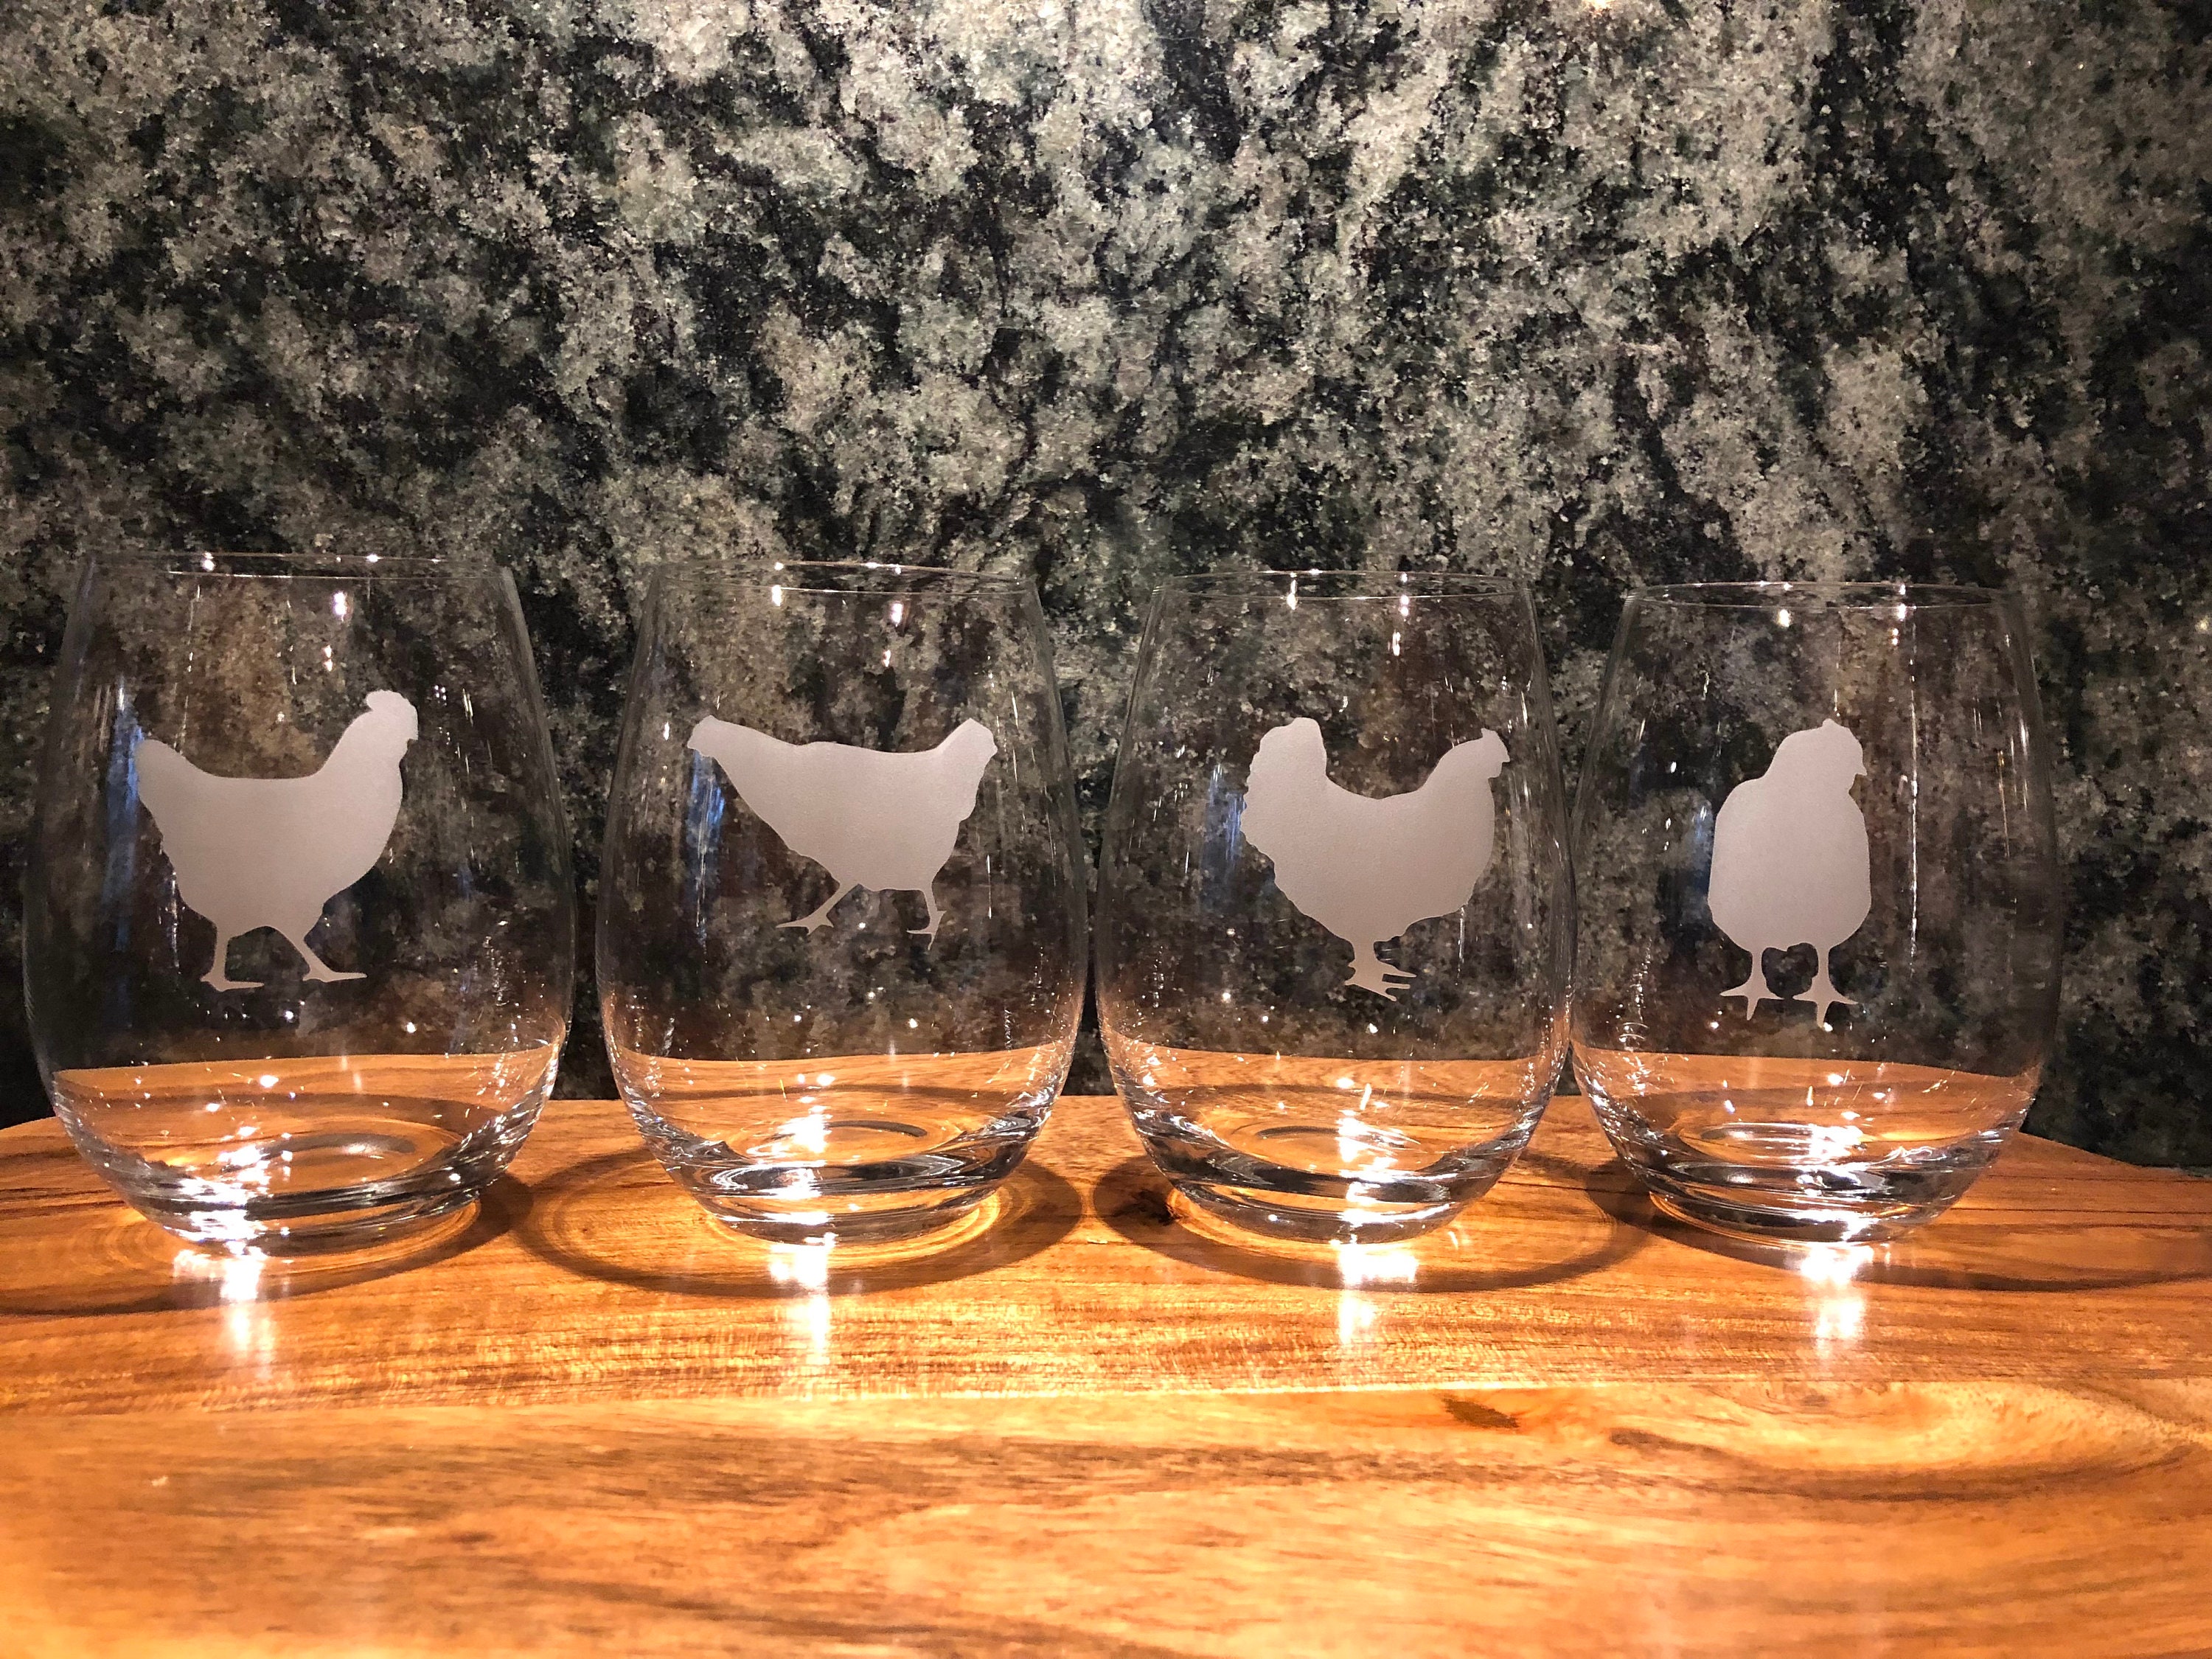 Don't Give a Cluck - Stemless Chicken Wine Glass for Women - Cute Funn -  bevvee